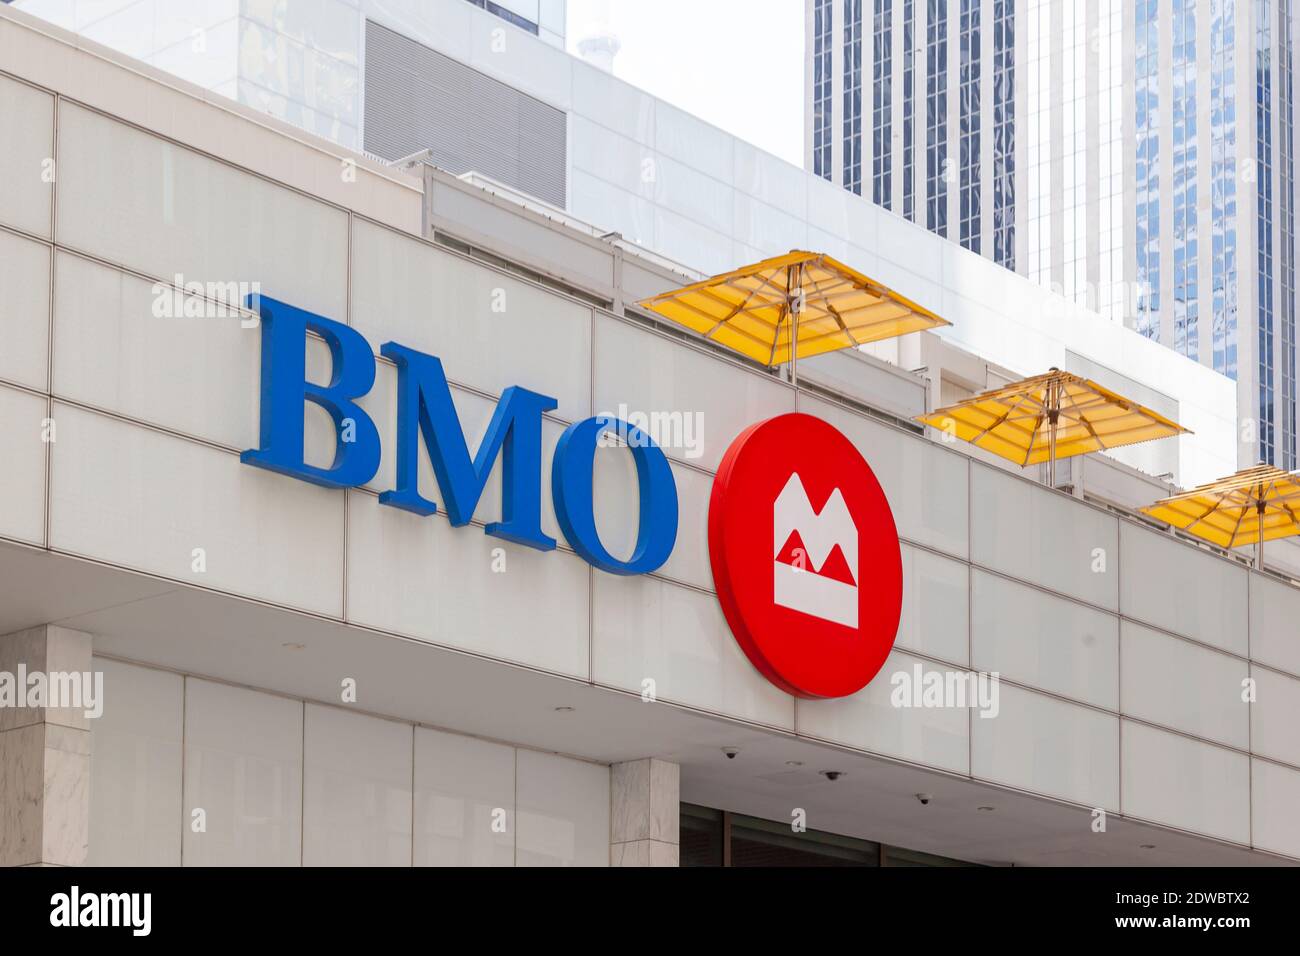 Toronto, Canada - May 16, 2020:  BMO (Bank of Montreal) sign is seen in Toronto, Canada. Stock Photo